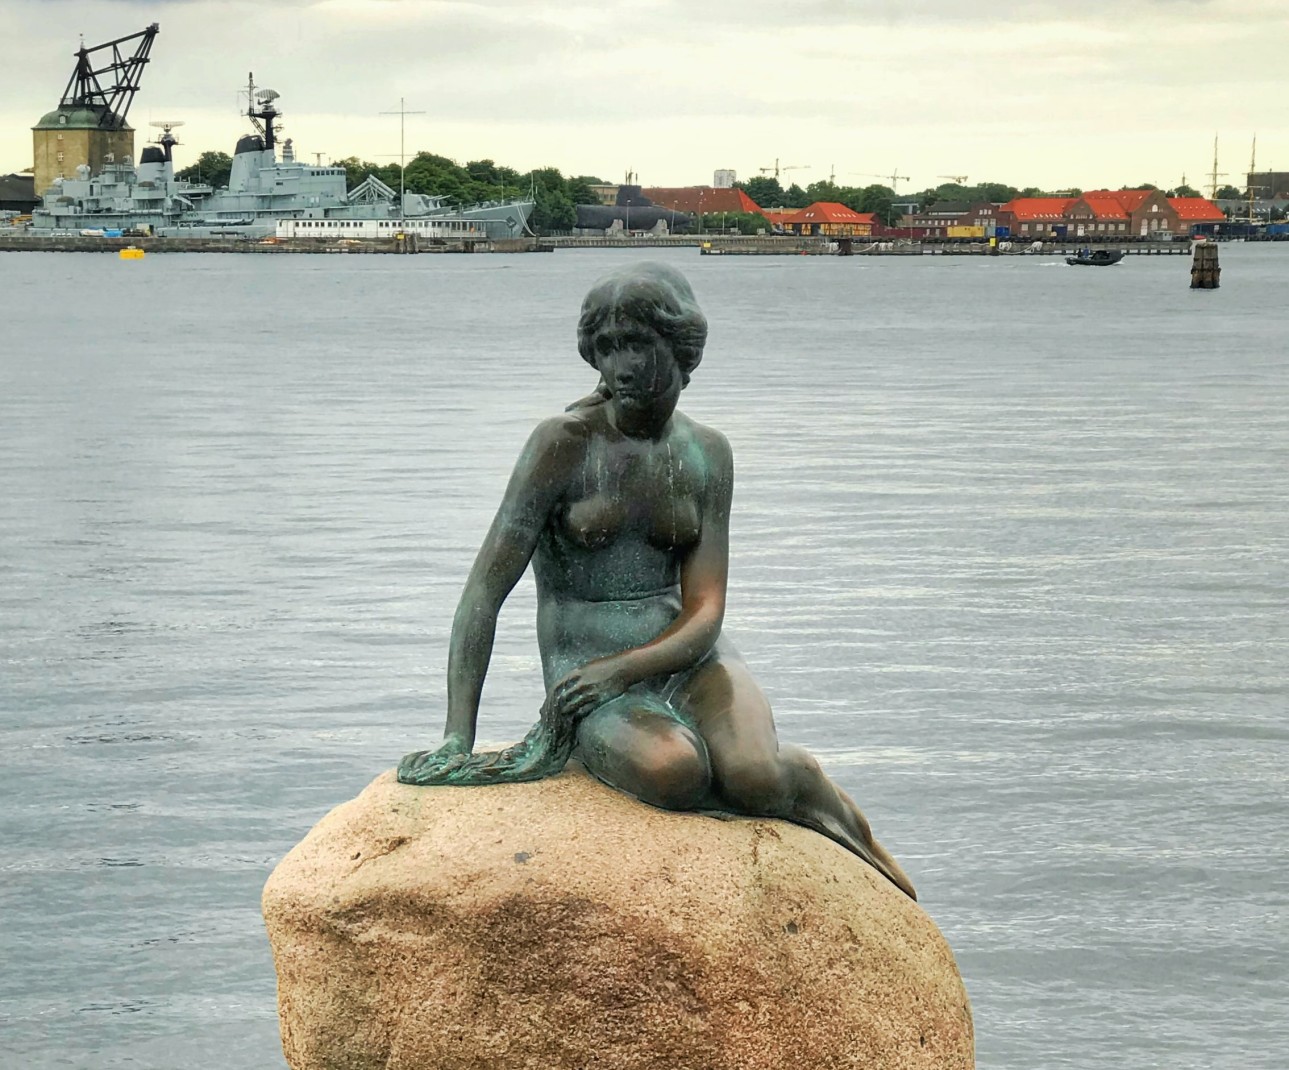 Statue on rock next to body of water during daytime